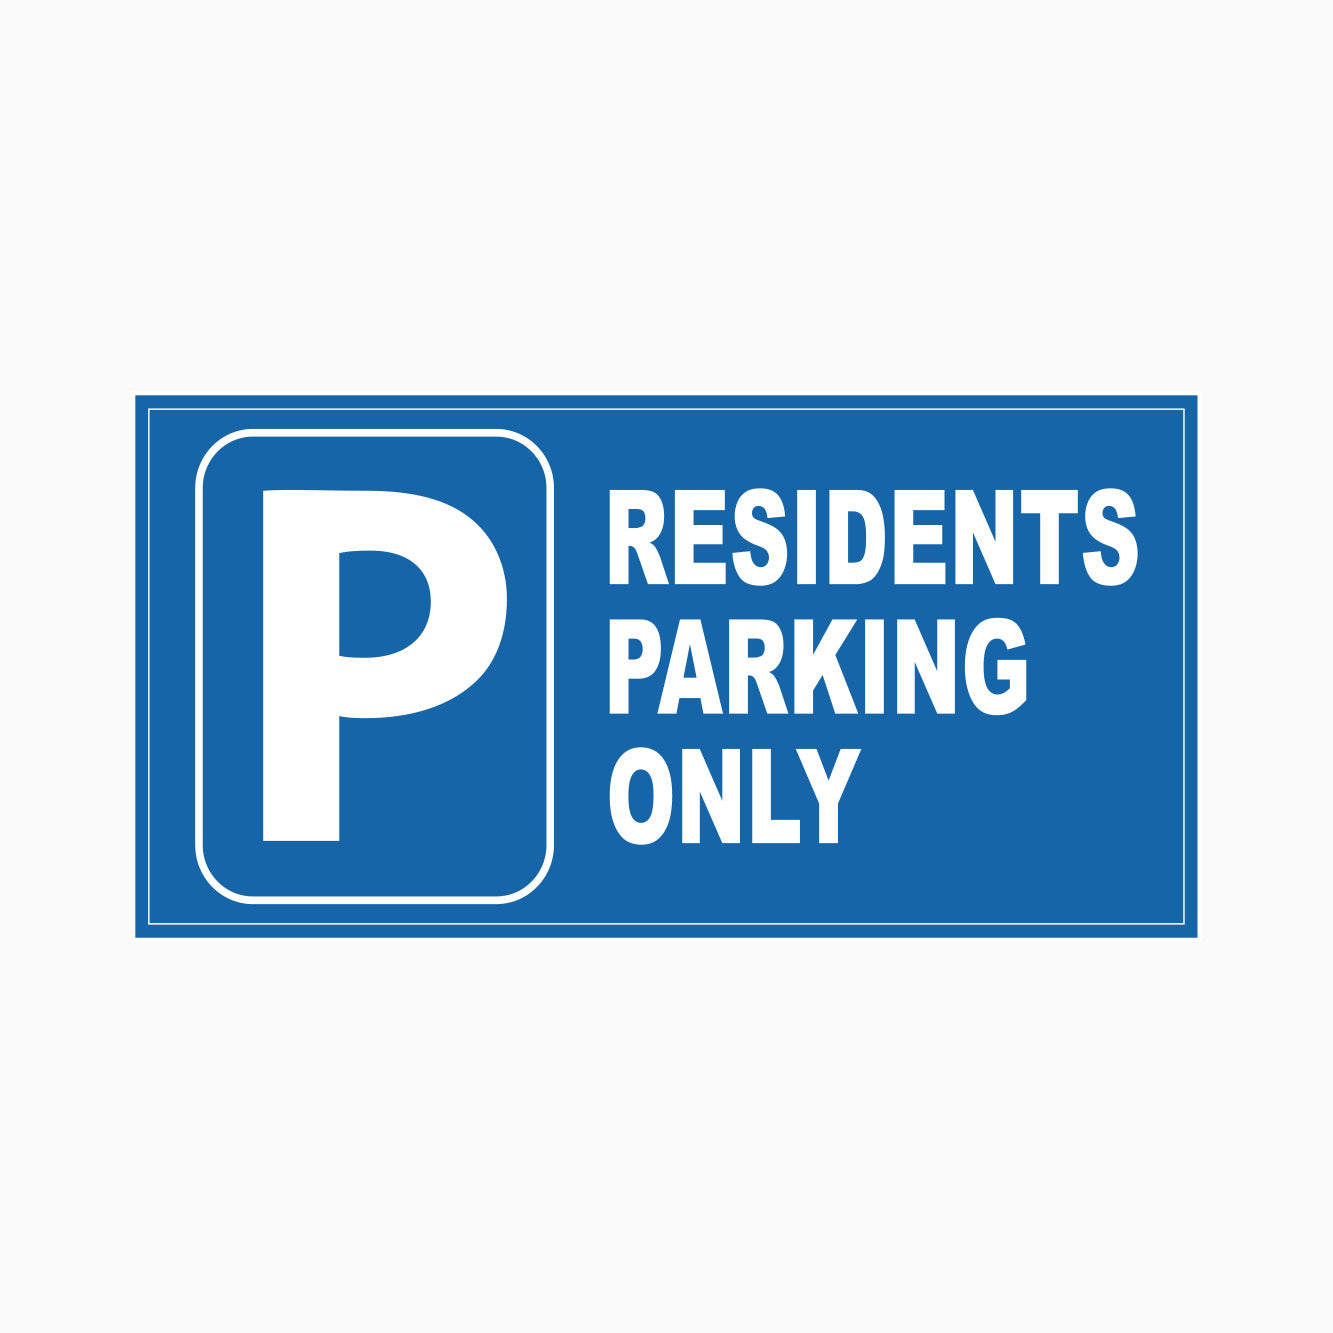 RESIDENTS PARKING ONLY SIGN - PARKING SIGNS AND NO PARKING SIGNS - SHOP ONLINE